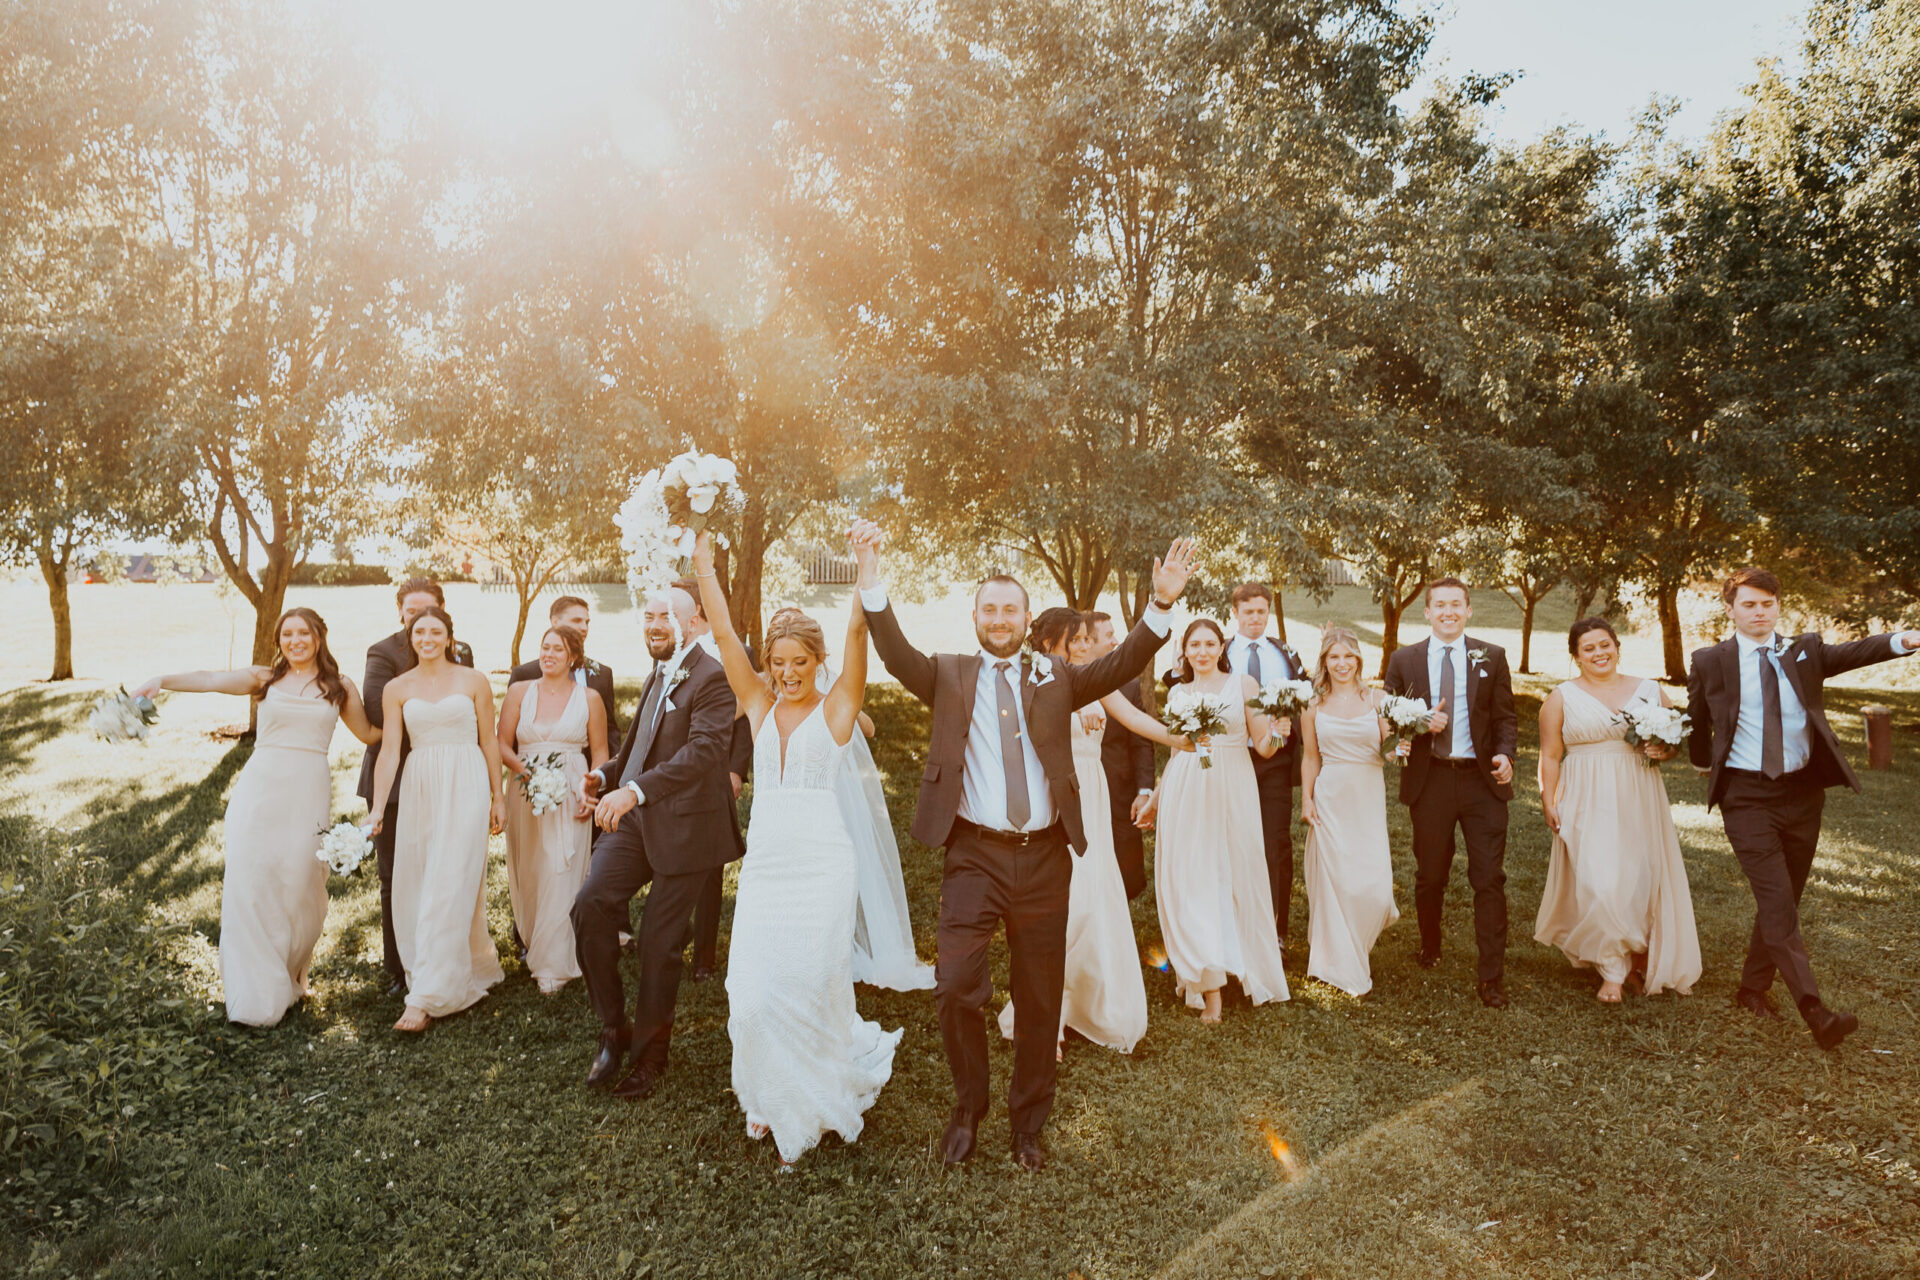 Zion Springs bride and groom celebrating with wedding party on estate lawn